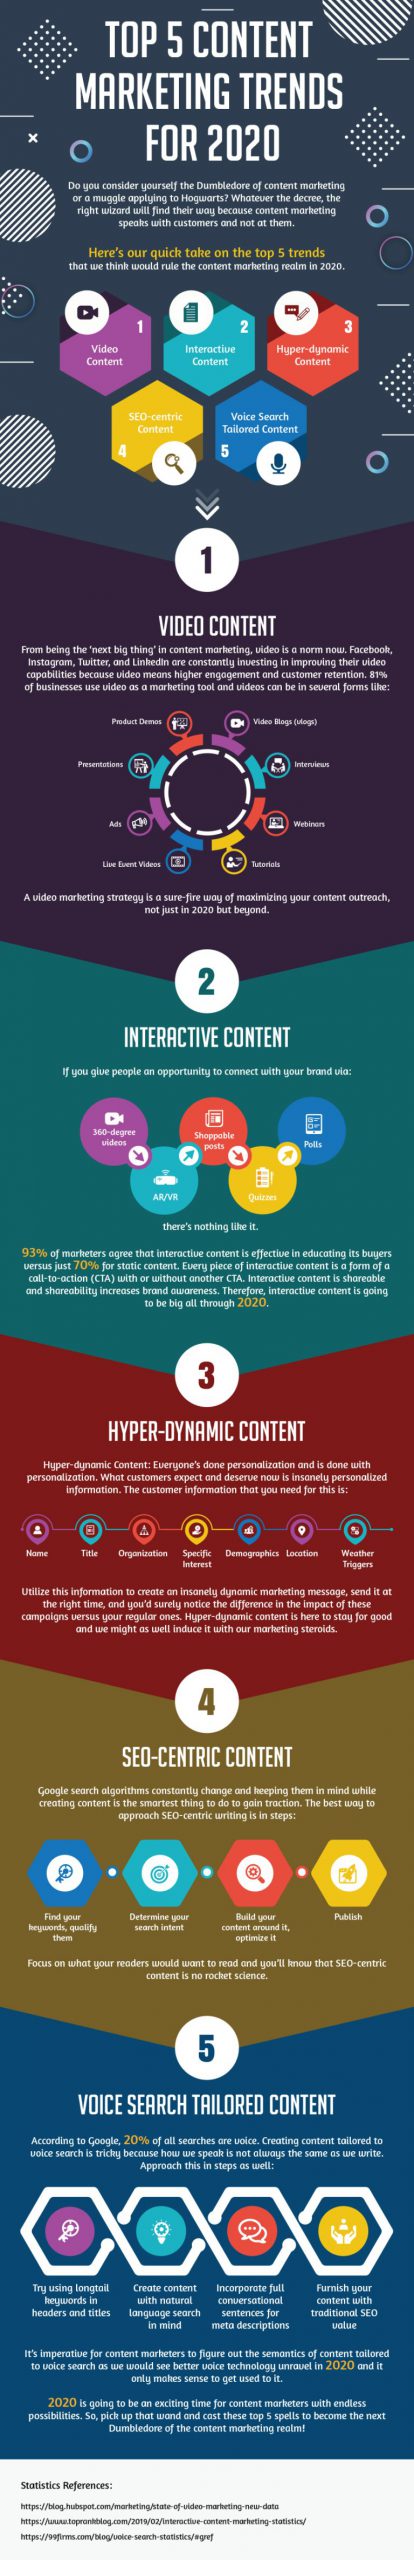 5 content marketing trends to help you through the coronavirus chaos infographic scaled 1